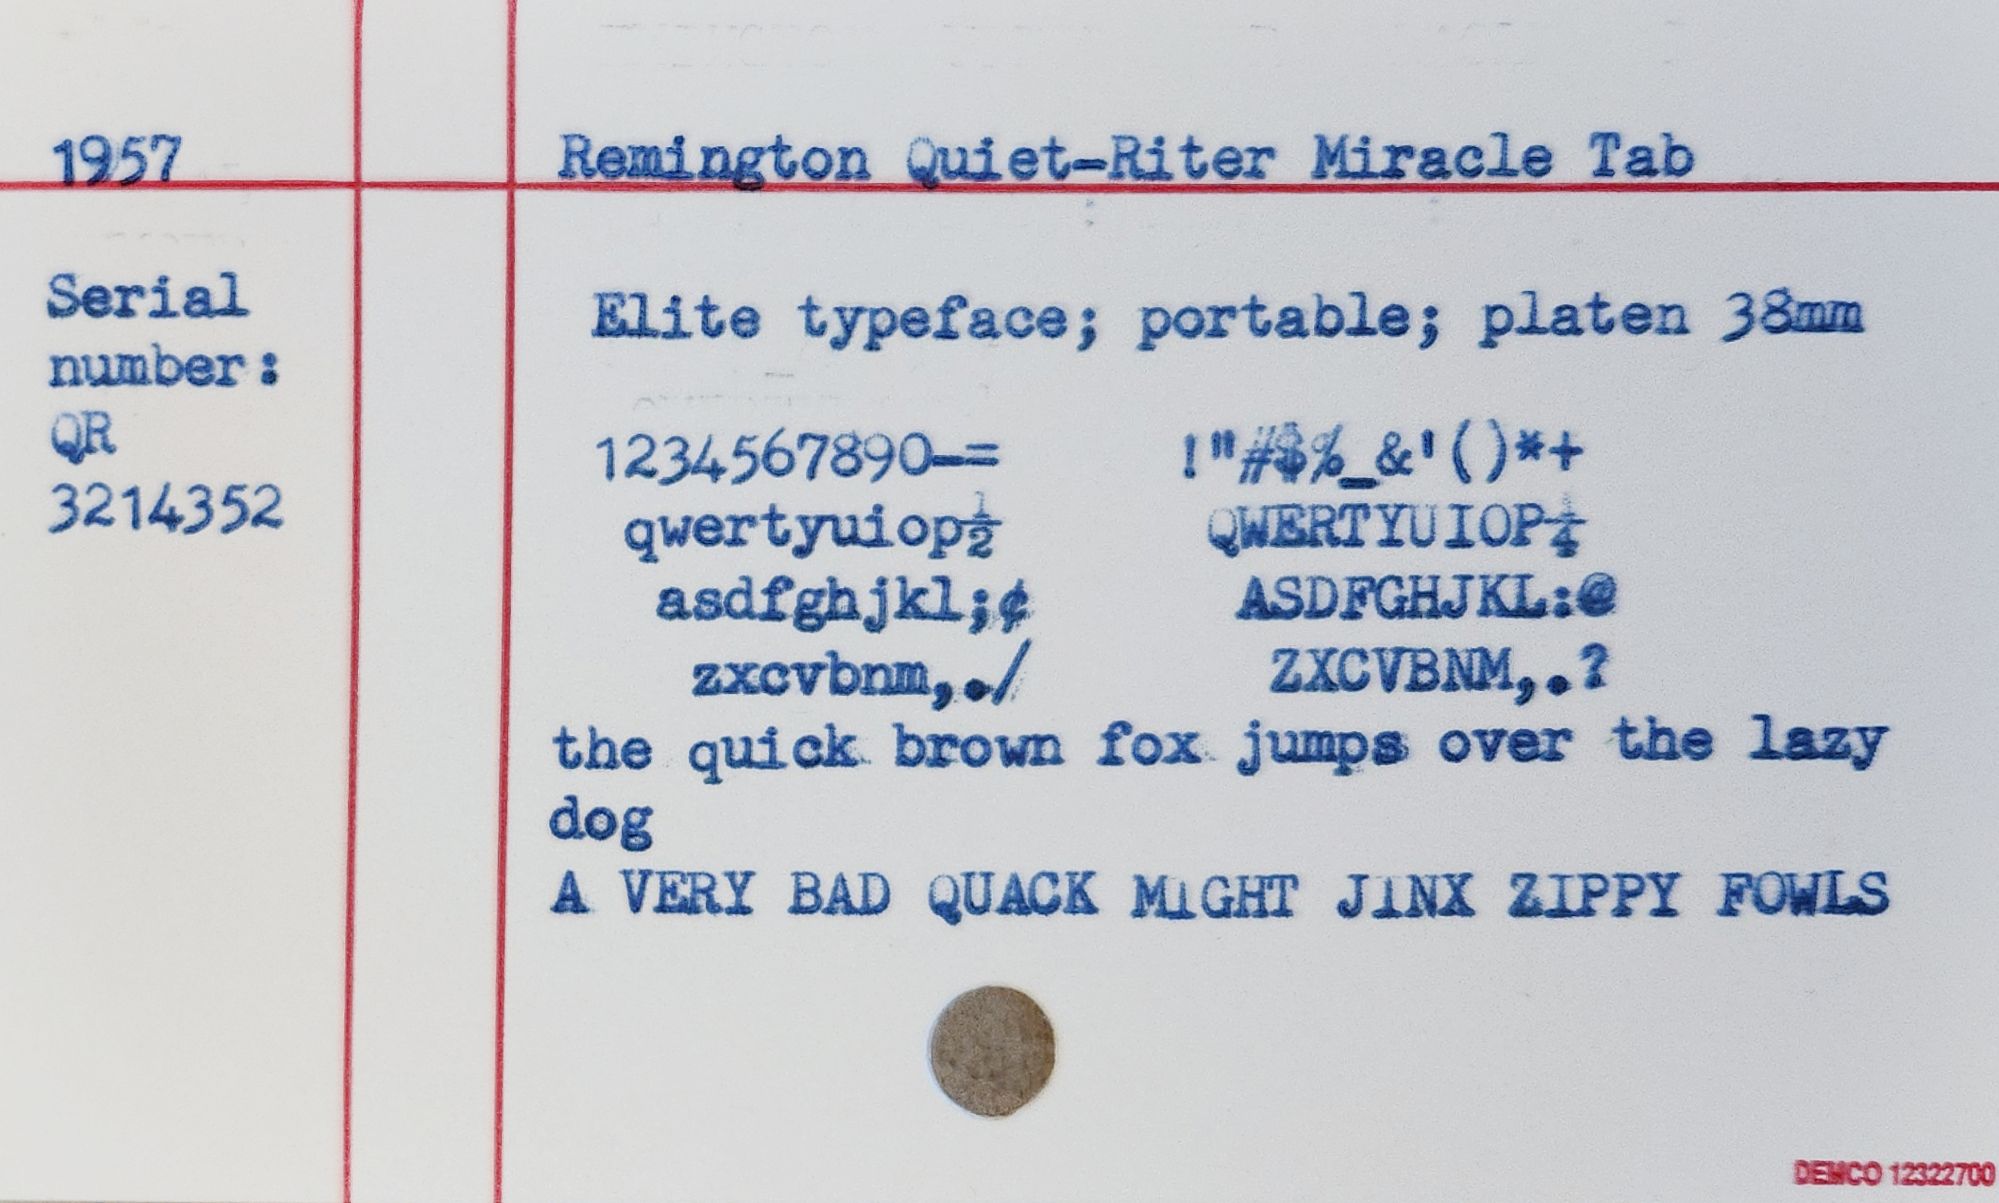 Typed library card catalog card that reads:
1957 Remington Quiet-Riter Miracle Tab 
Serial number: QR 3214352 
Elite typeface; portable; platen 38mm 
1234567890-= !